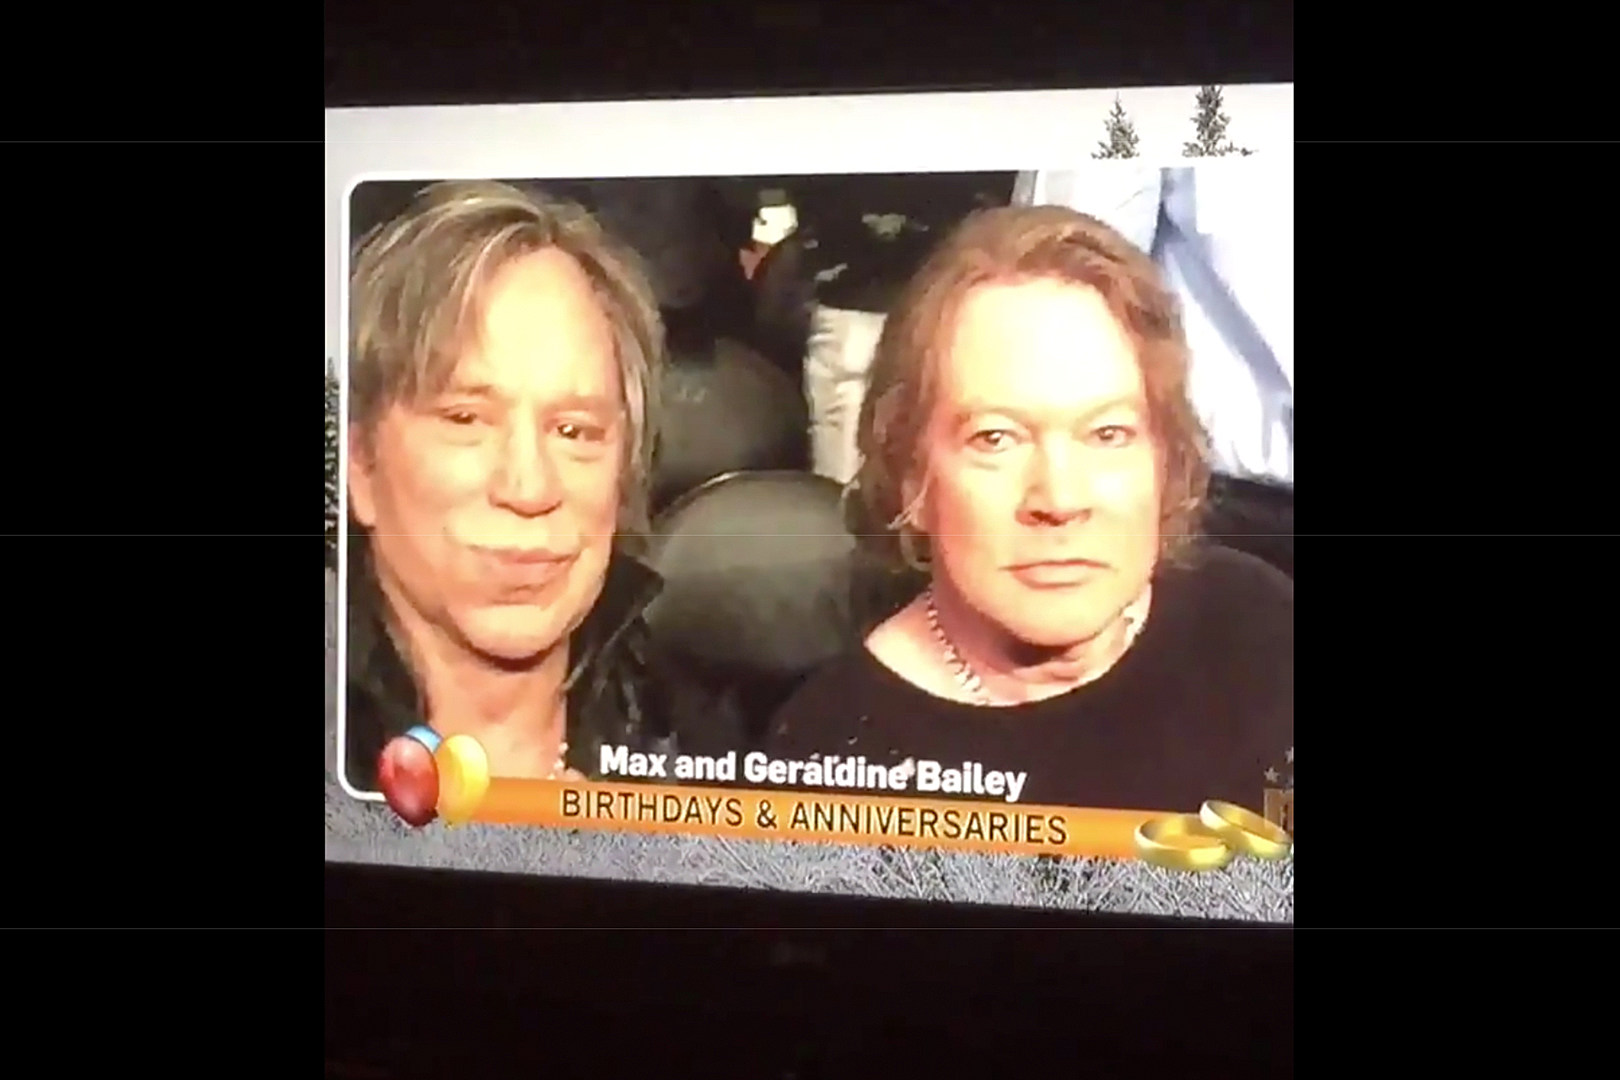 Local Newscast Mistakes Axl Rose, Mickey Rourke as Married Couple